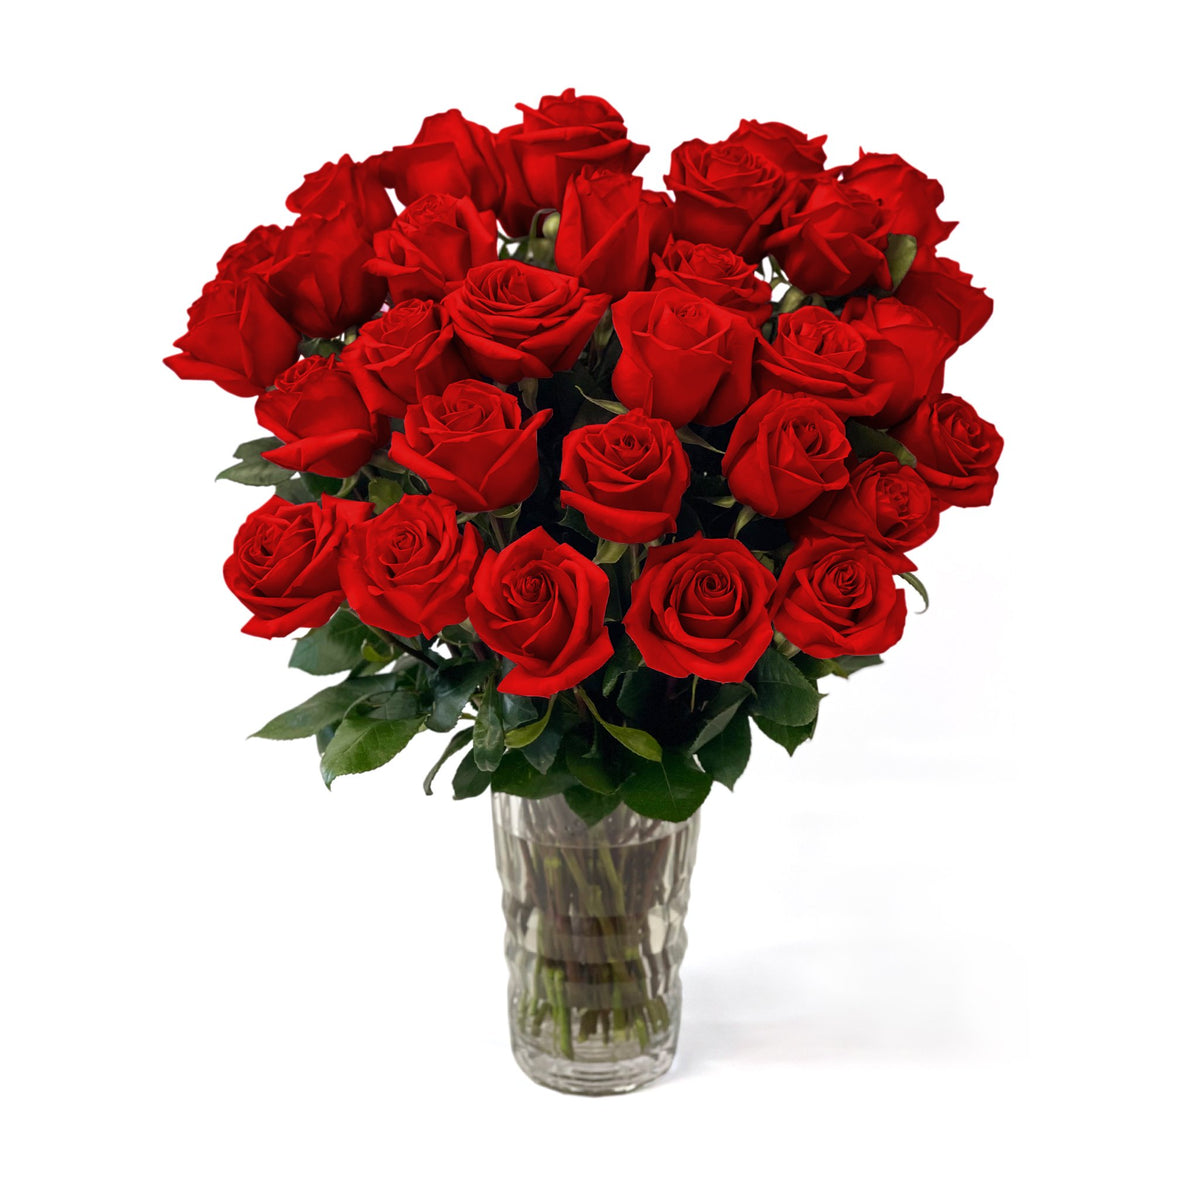 Queens Flower Delivery - Fresh Roses in a Crystal Vase | Red